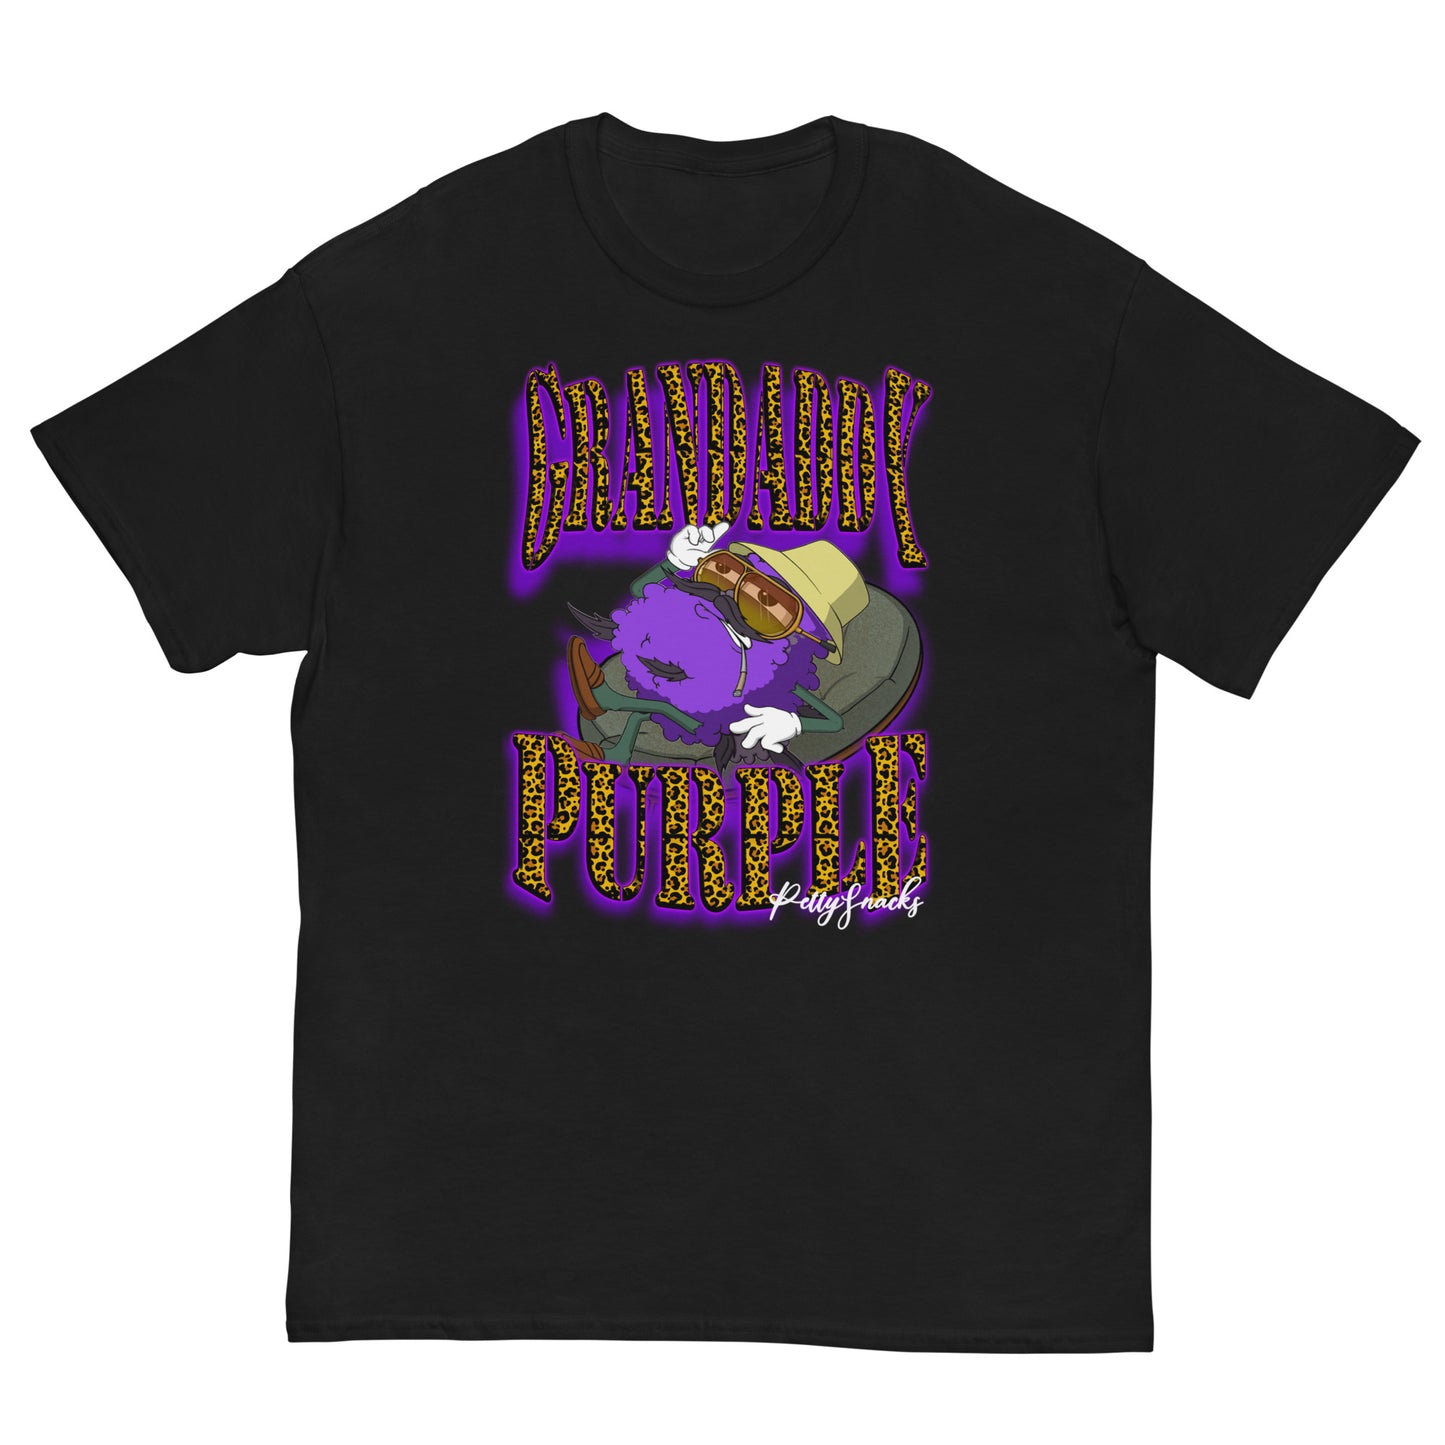 Black T-Shirt. Front Graphic: Leopard print lettering with purple outer glow on top and bottom that reads "Grandaddy Purple". In the middle of the words is a large Purple weed nugget character with a cigarette extended out of mouth, yellows shades, and a safari hat. The nug is sitting on a papasan chair. "Petty Snacks" is in small white cursive on bottom right corner of graphic. 